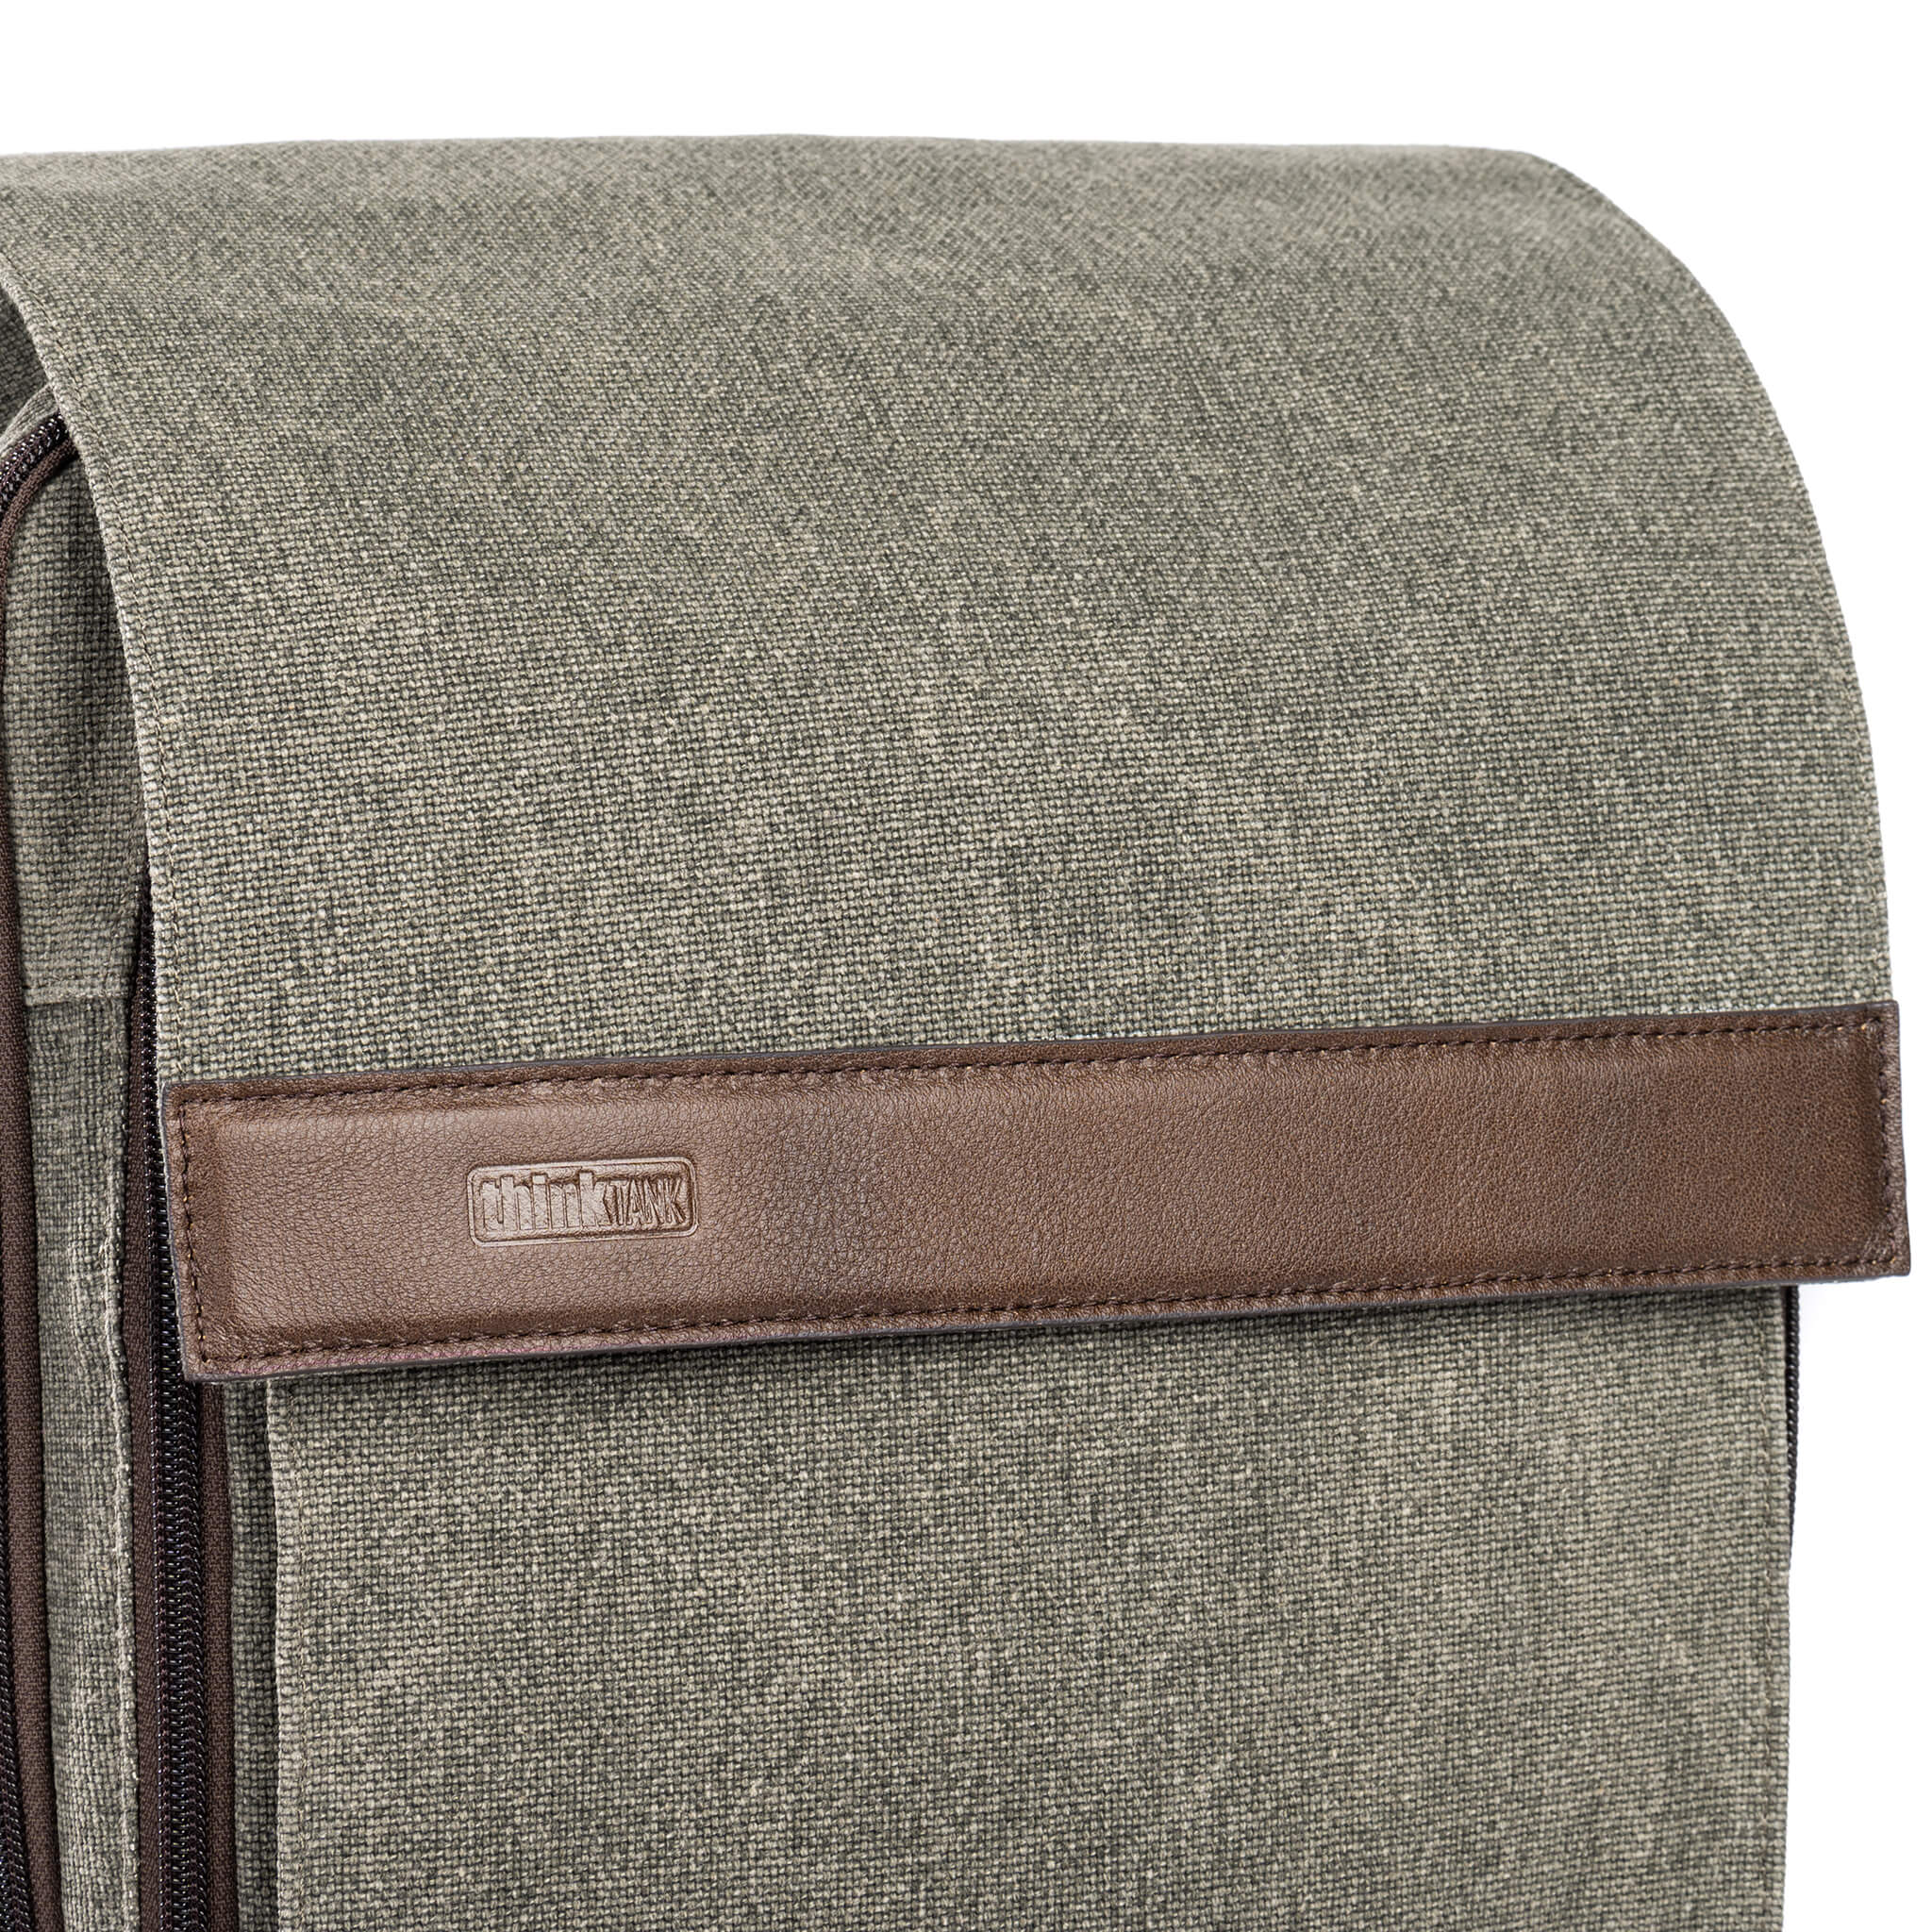 Stone-washed, weather-treated, 100% cotton canvas exterior with two-tone twill interior liner